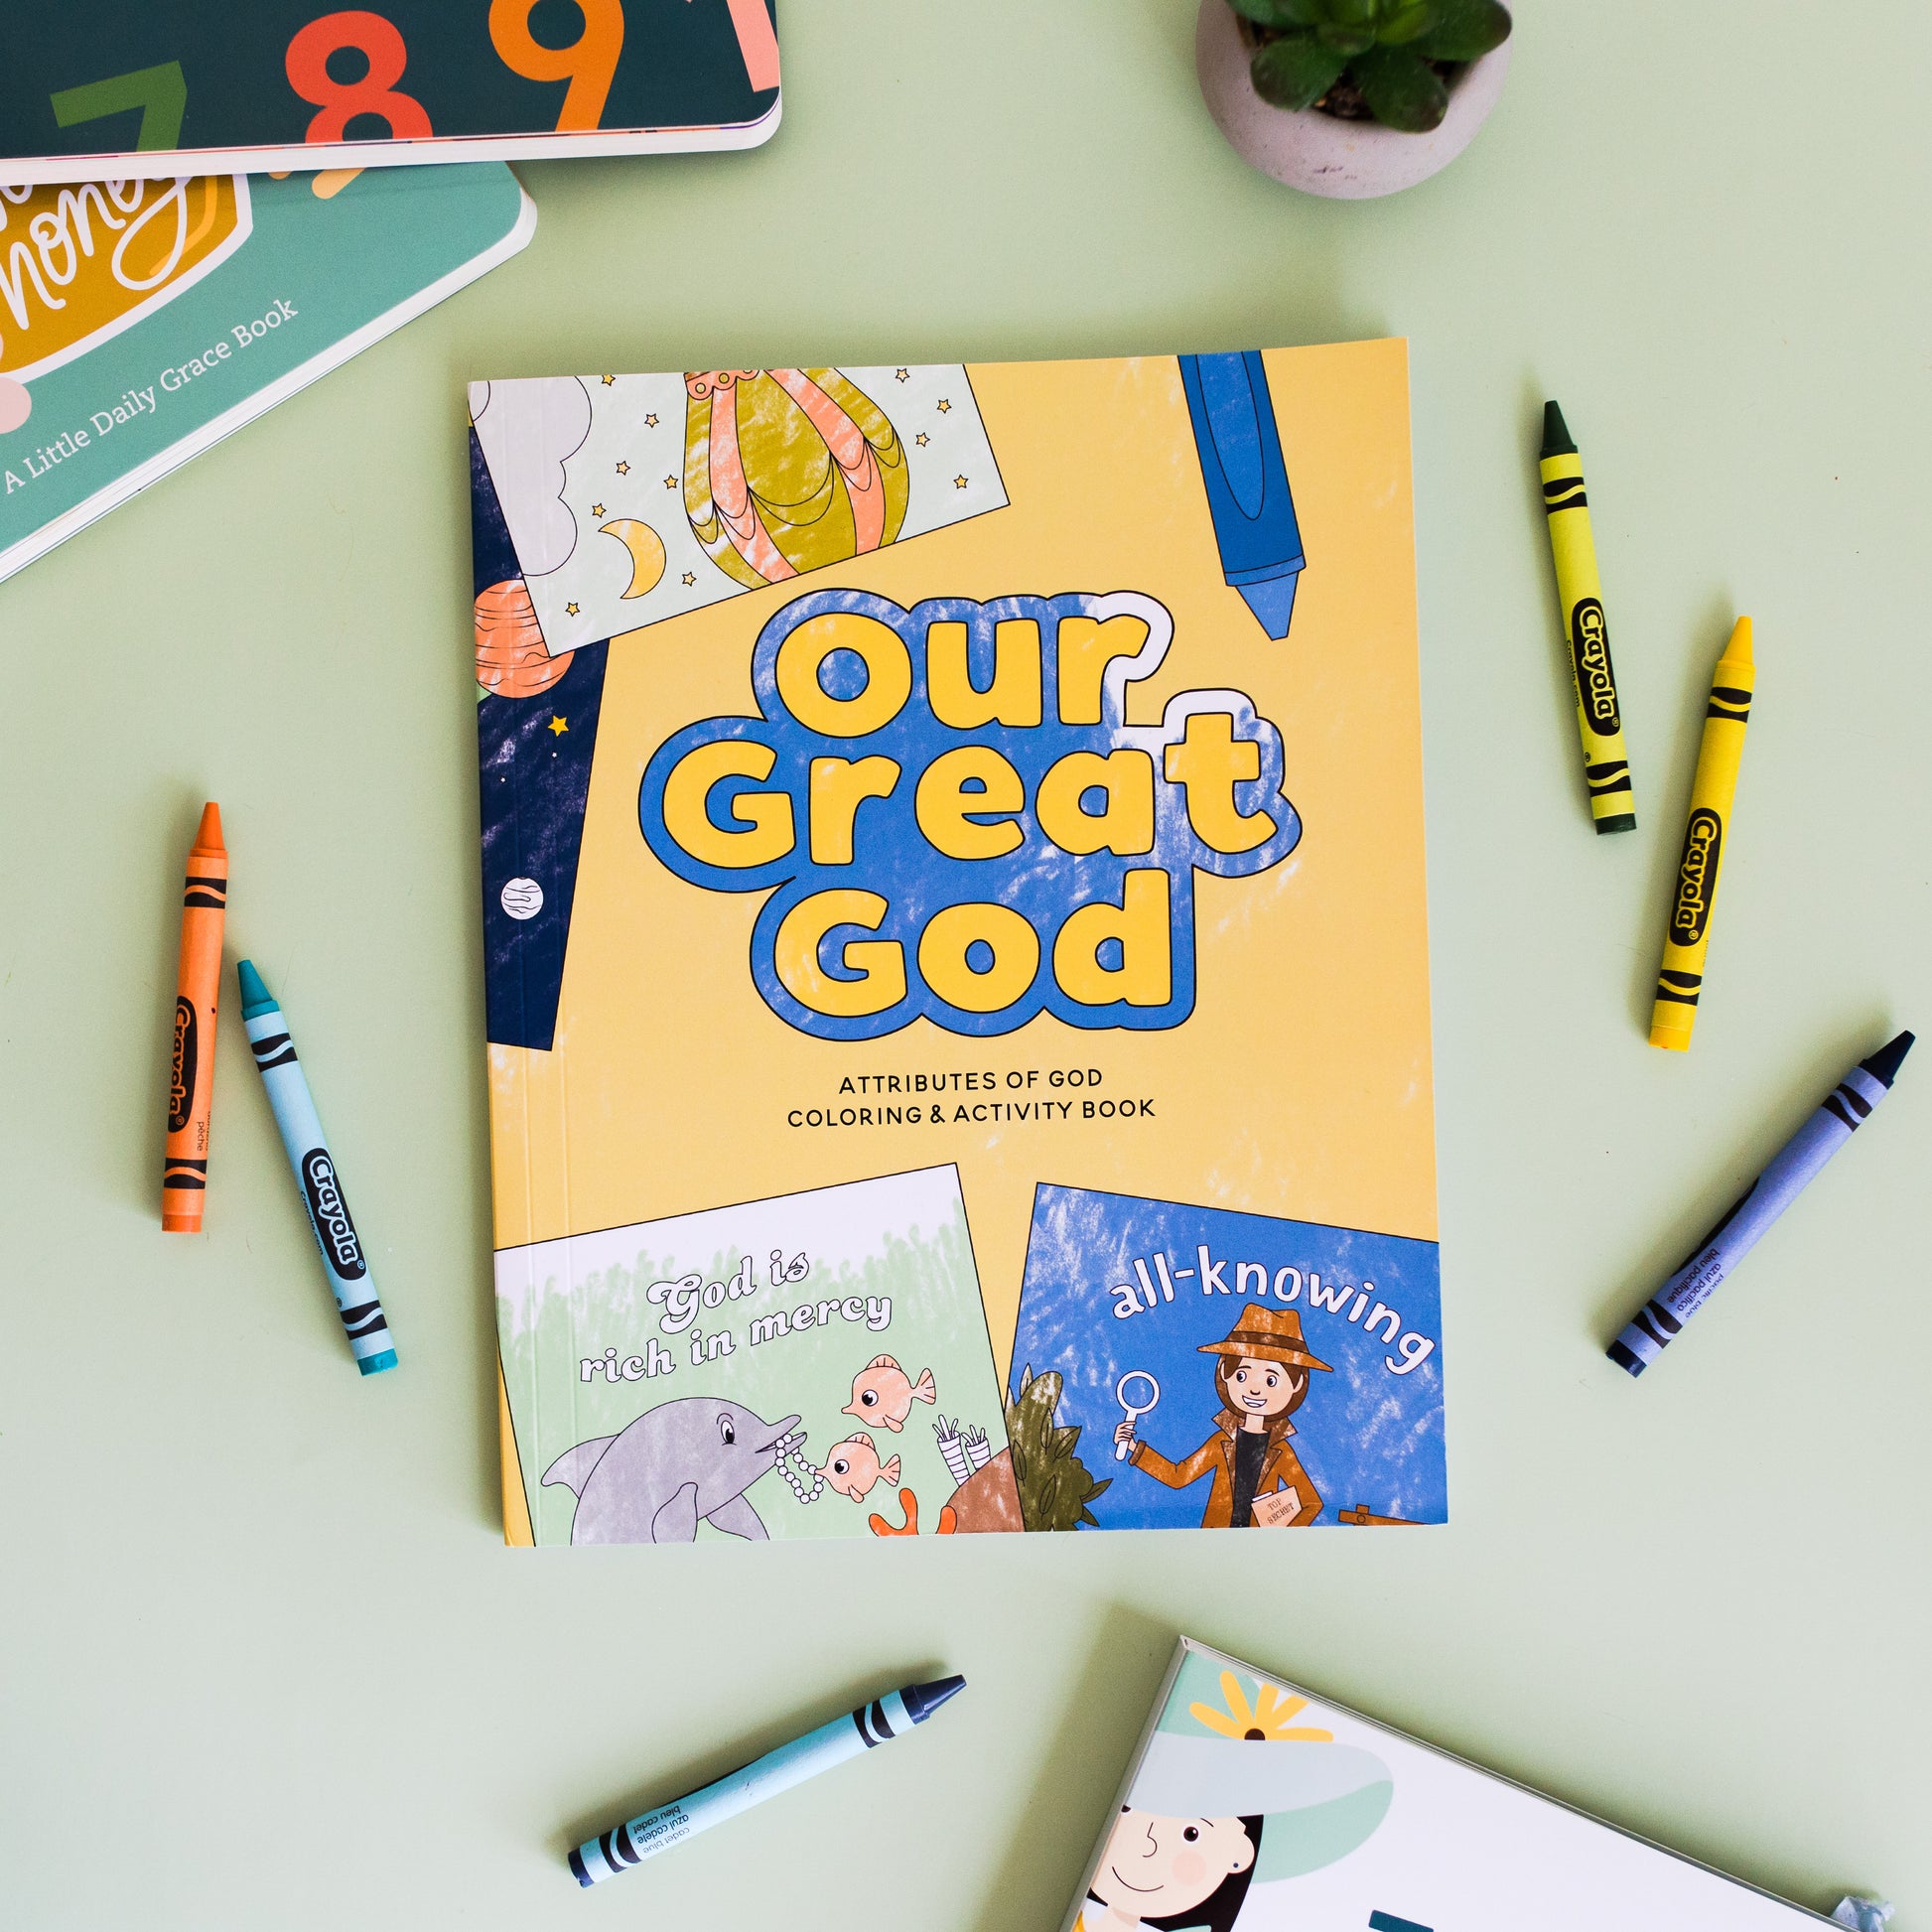 Coloring Gospel Truths: A Devotional Coloring Book and Journal